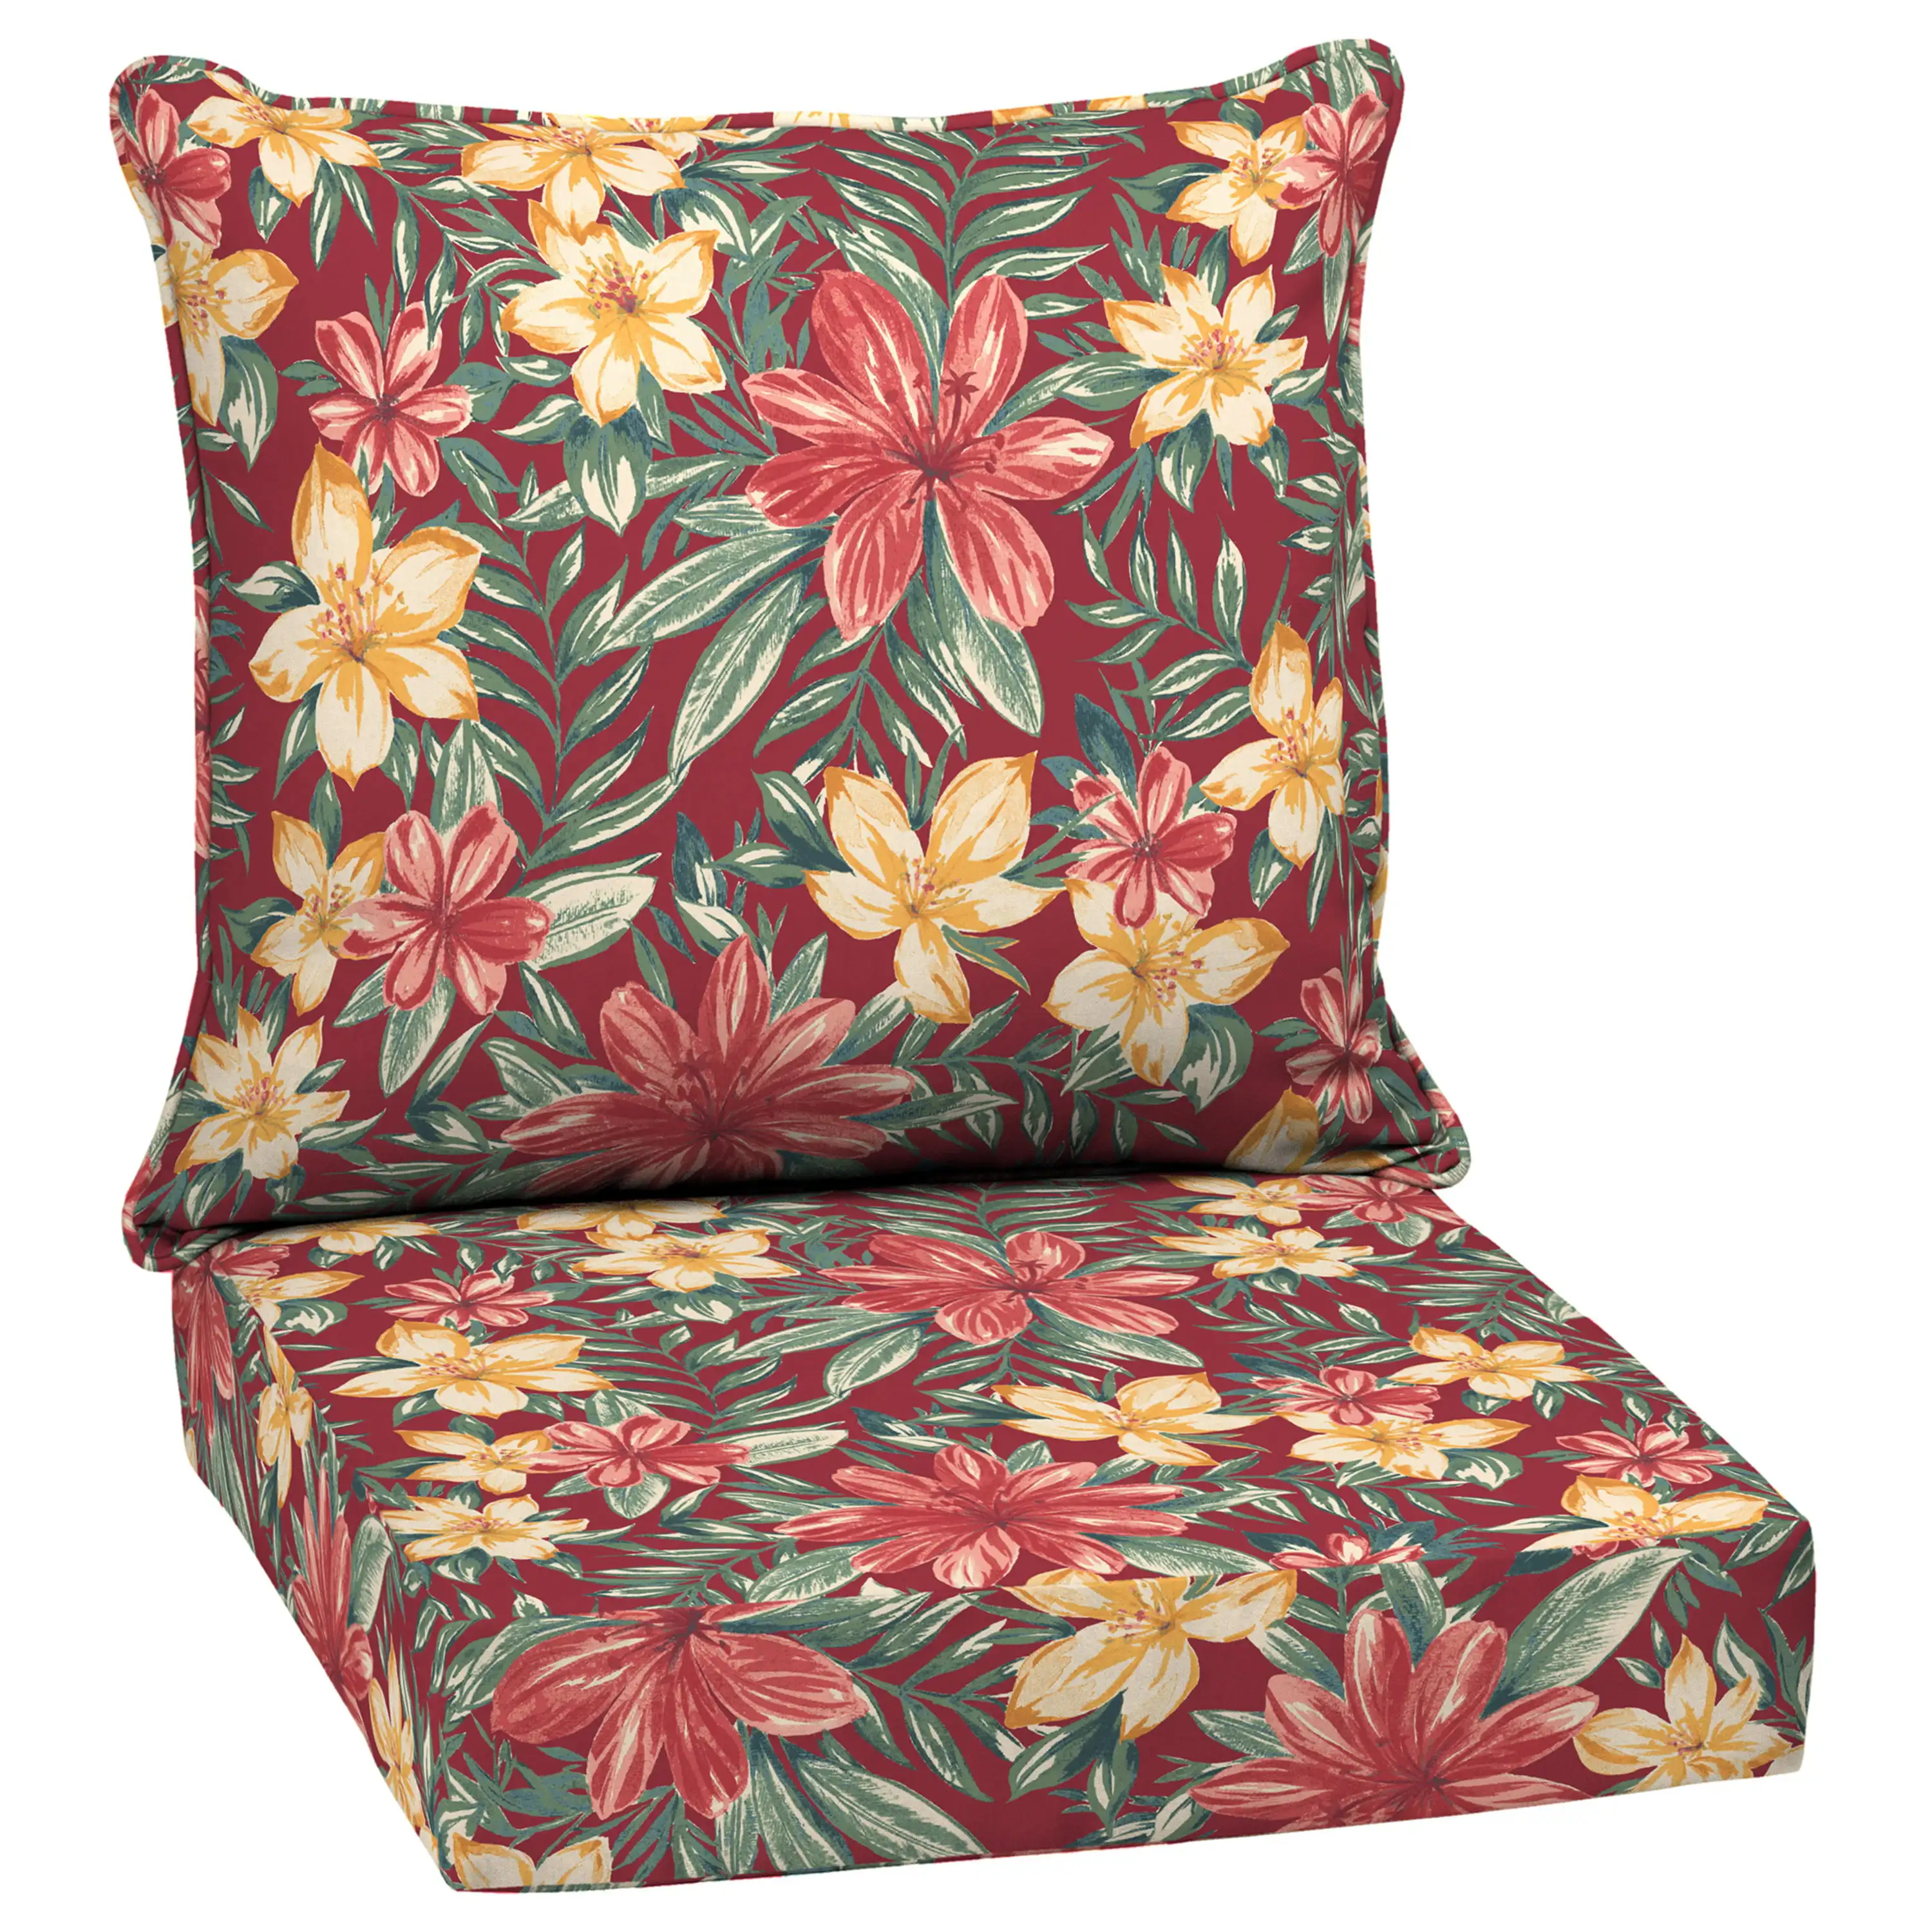 

Arden Selections Outdoor Deep Seating Cushion Set 24 x 24, Ruby Clarissa